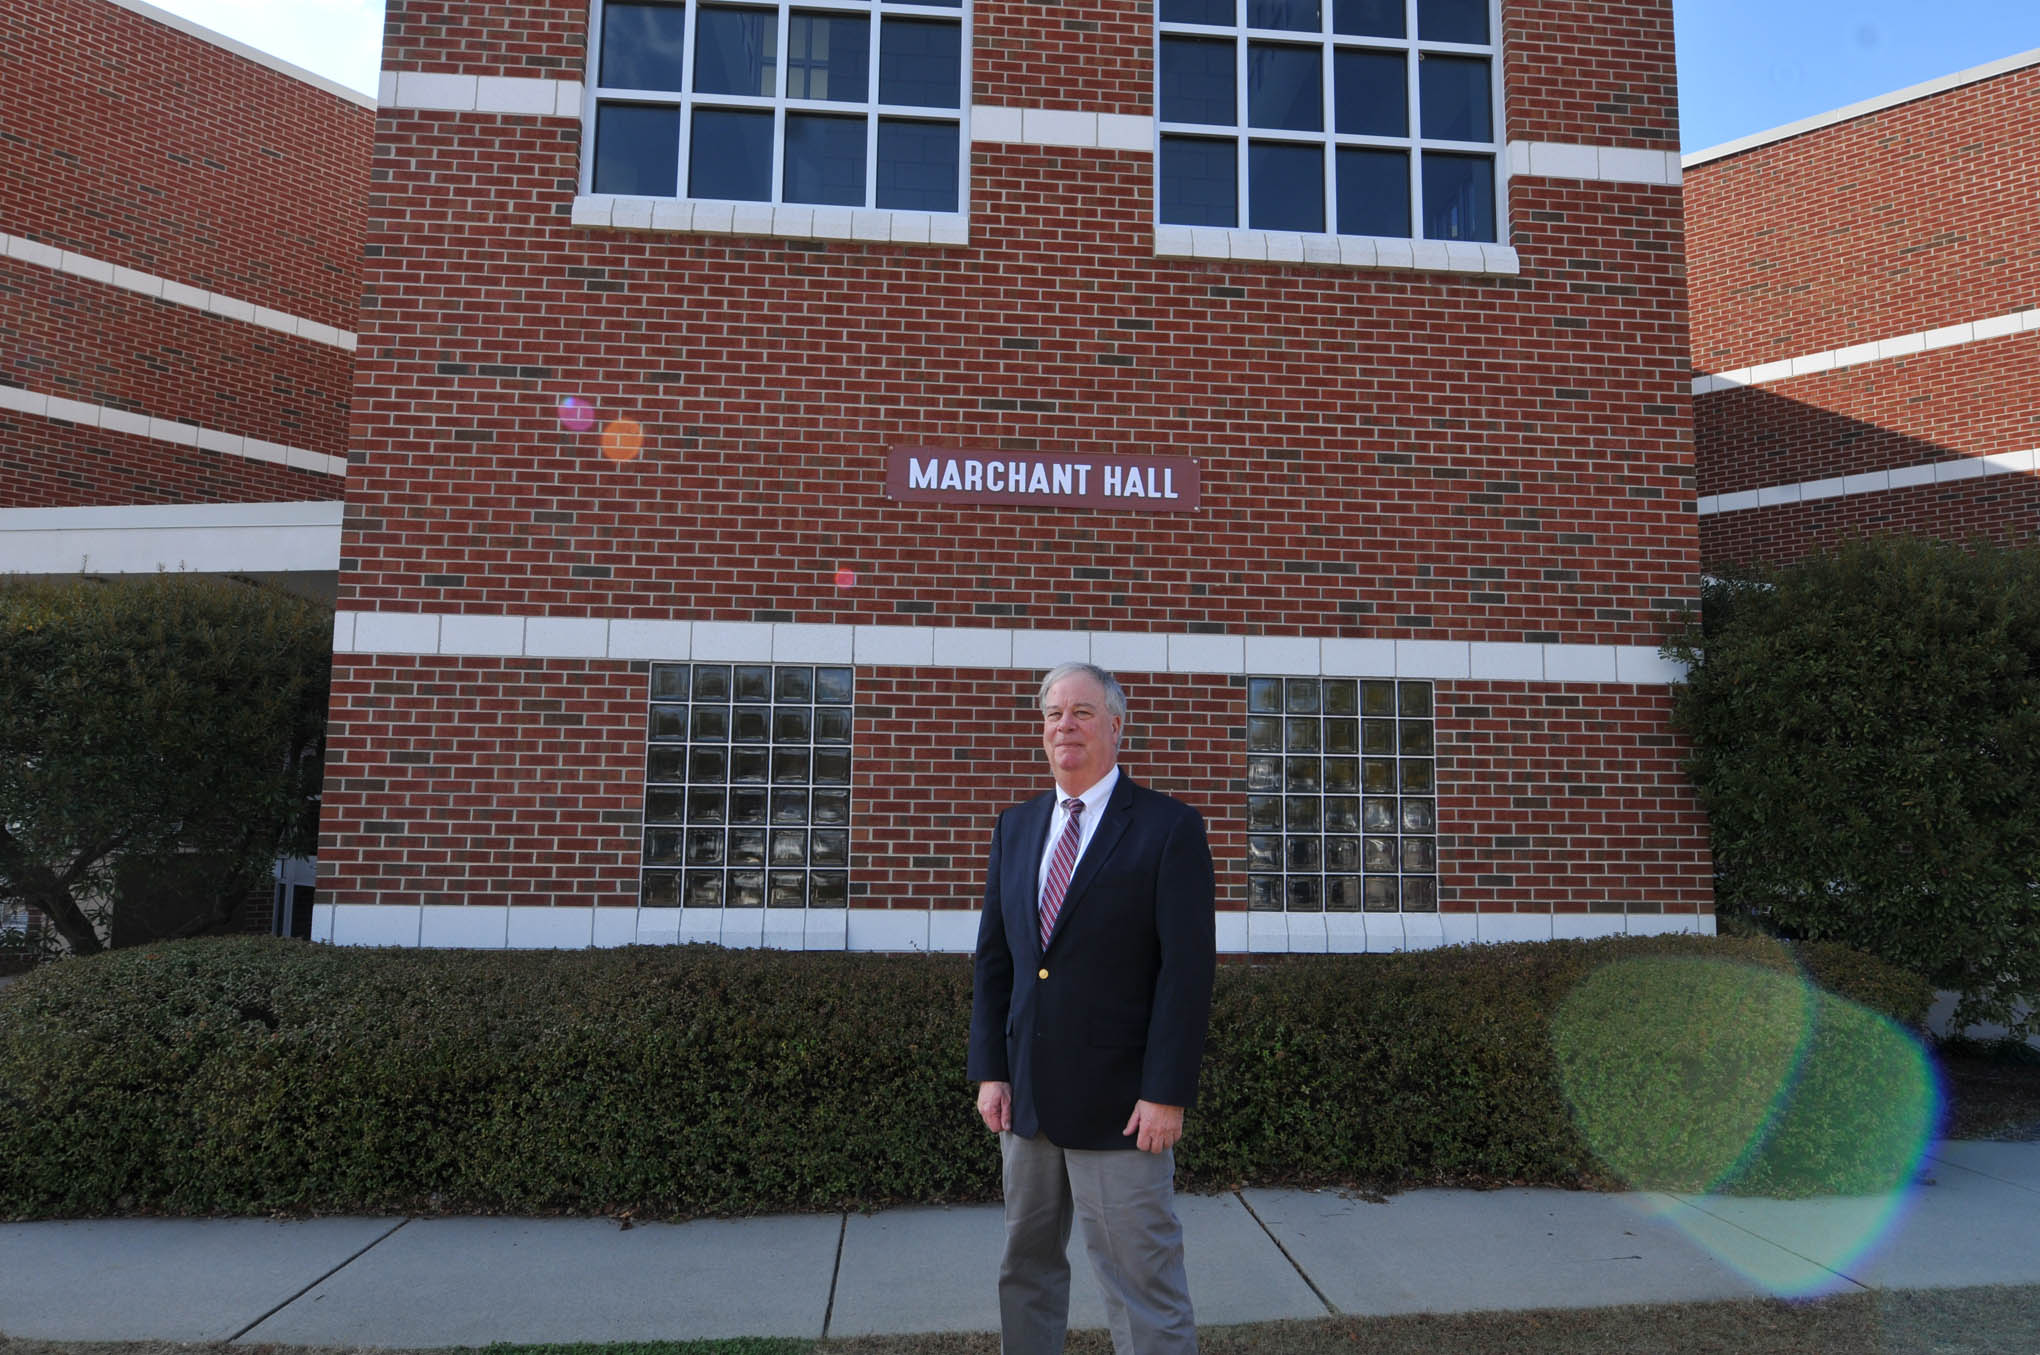 CCCC honors Dr. Marchant with building naming honor